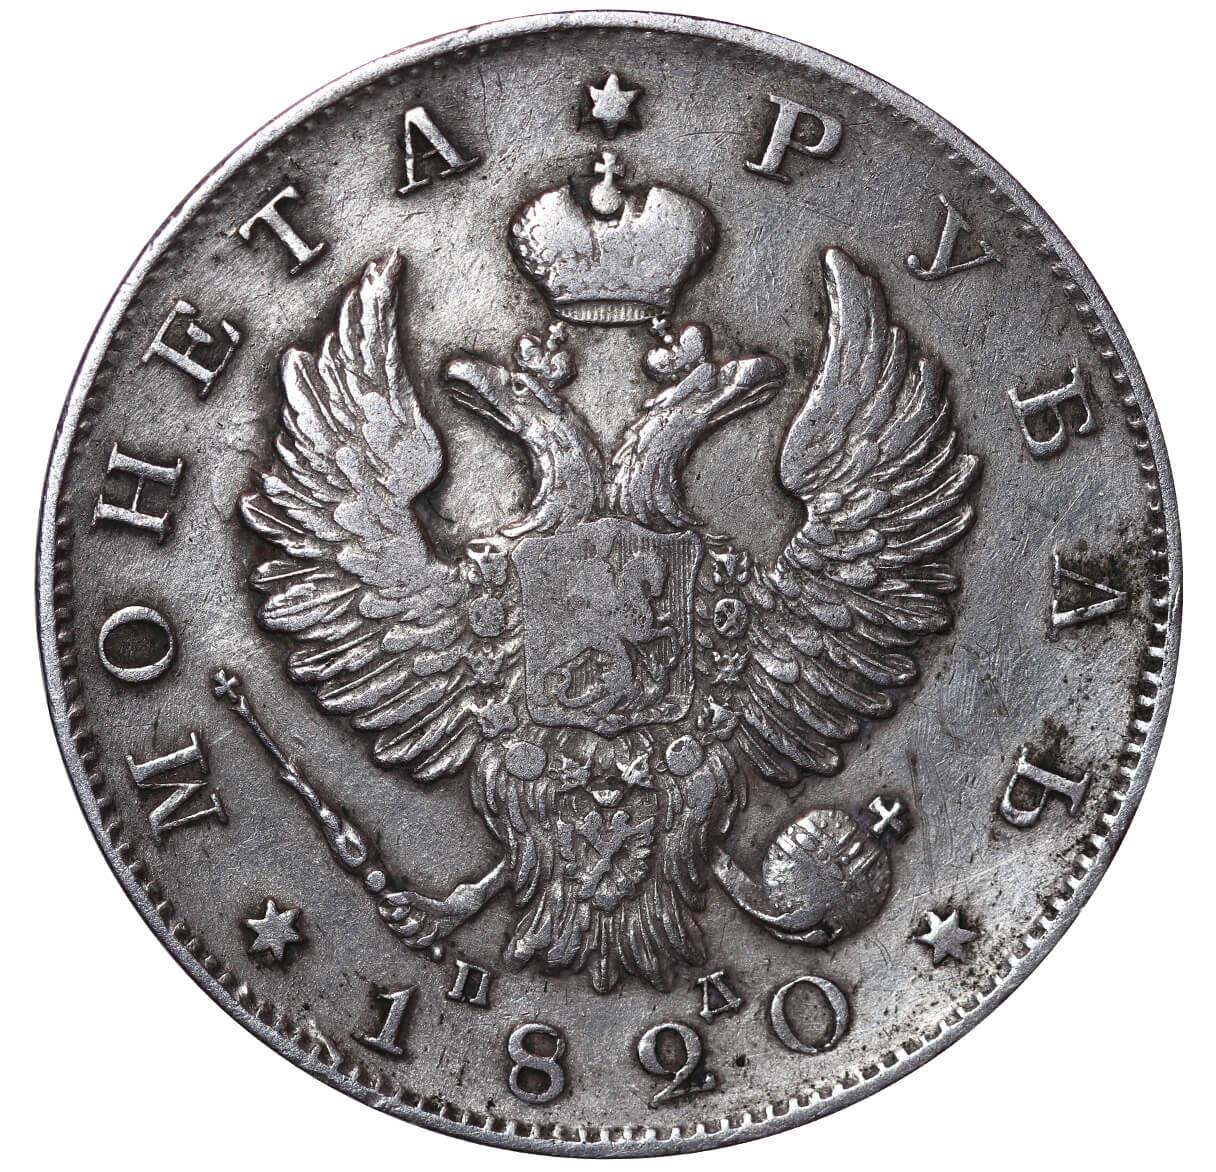 Russian Empire, 1 Rouble, 1820 year, SPB-PD - Image 3 of 3